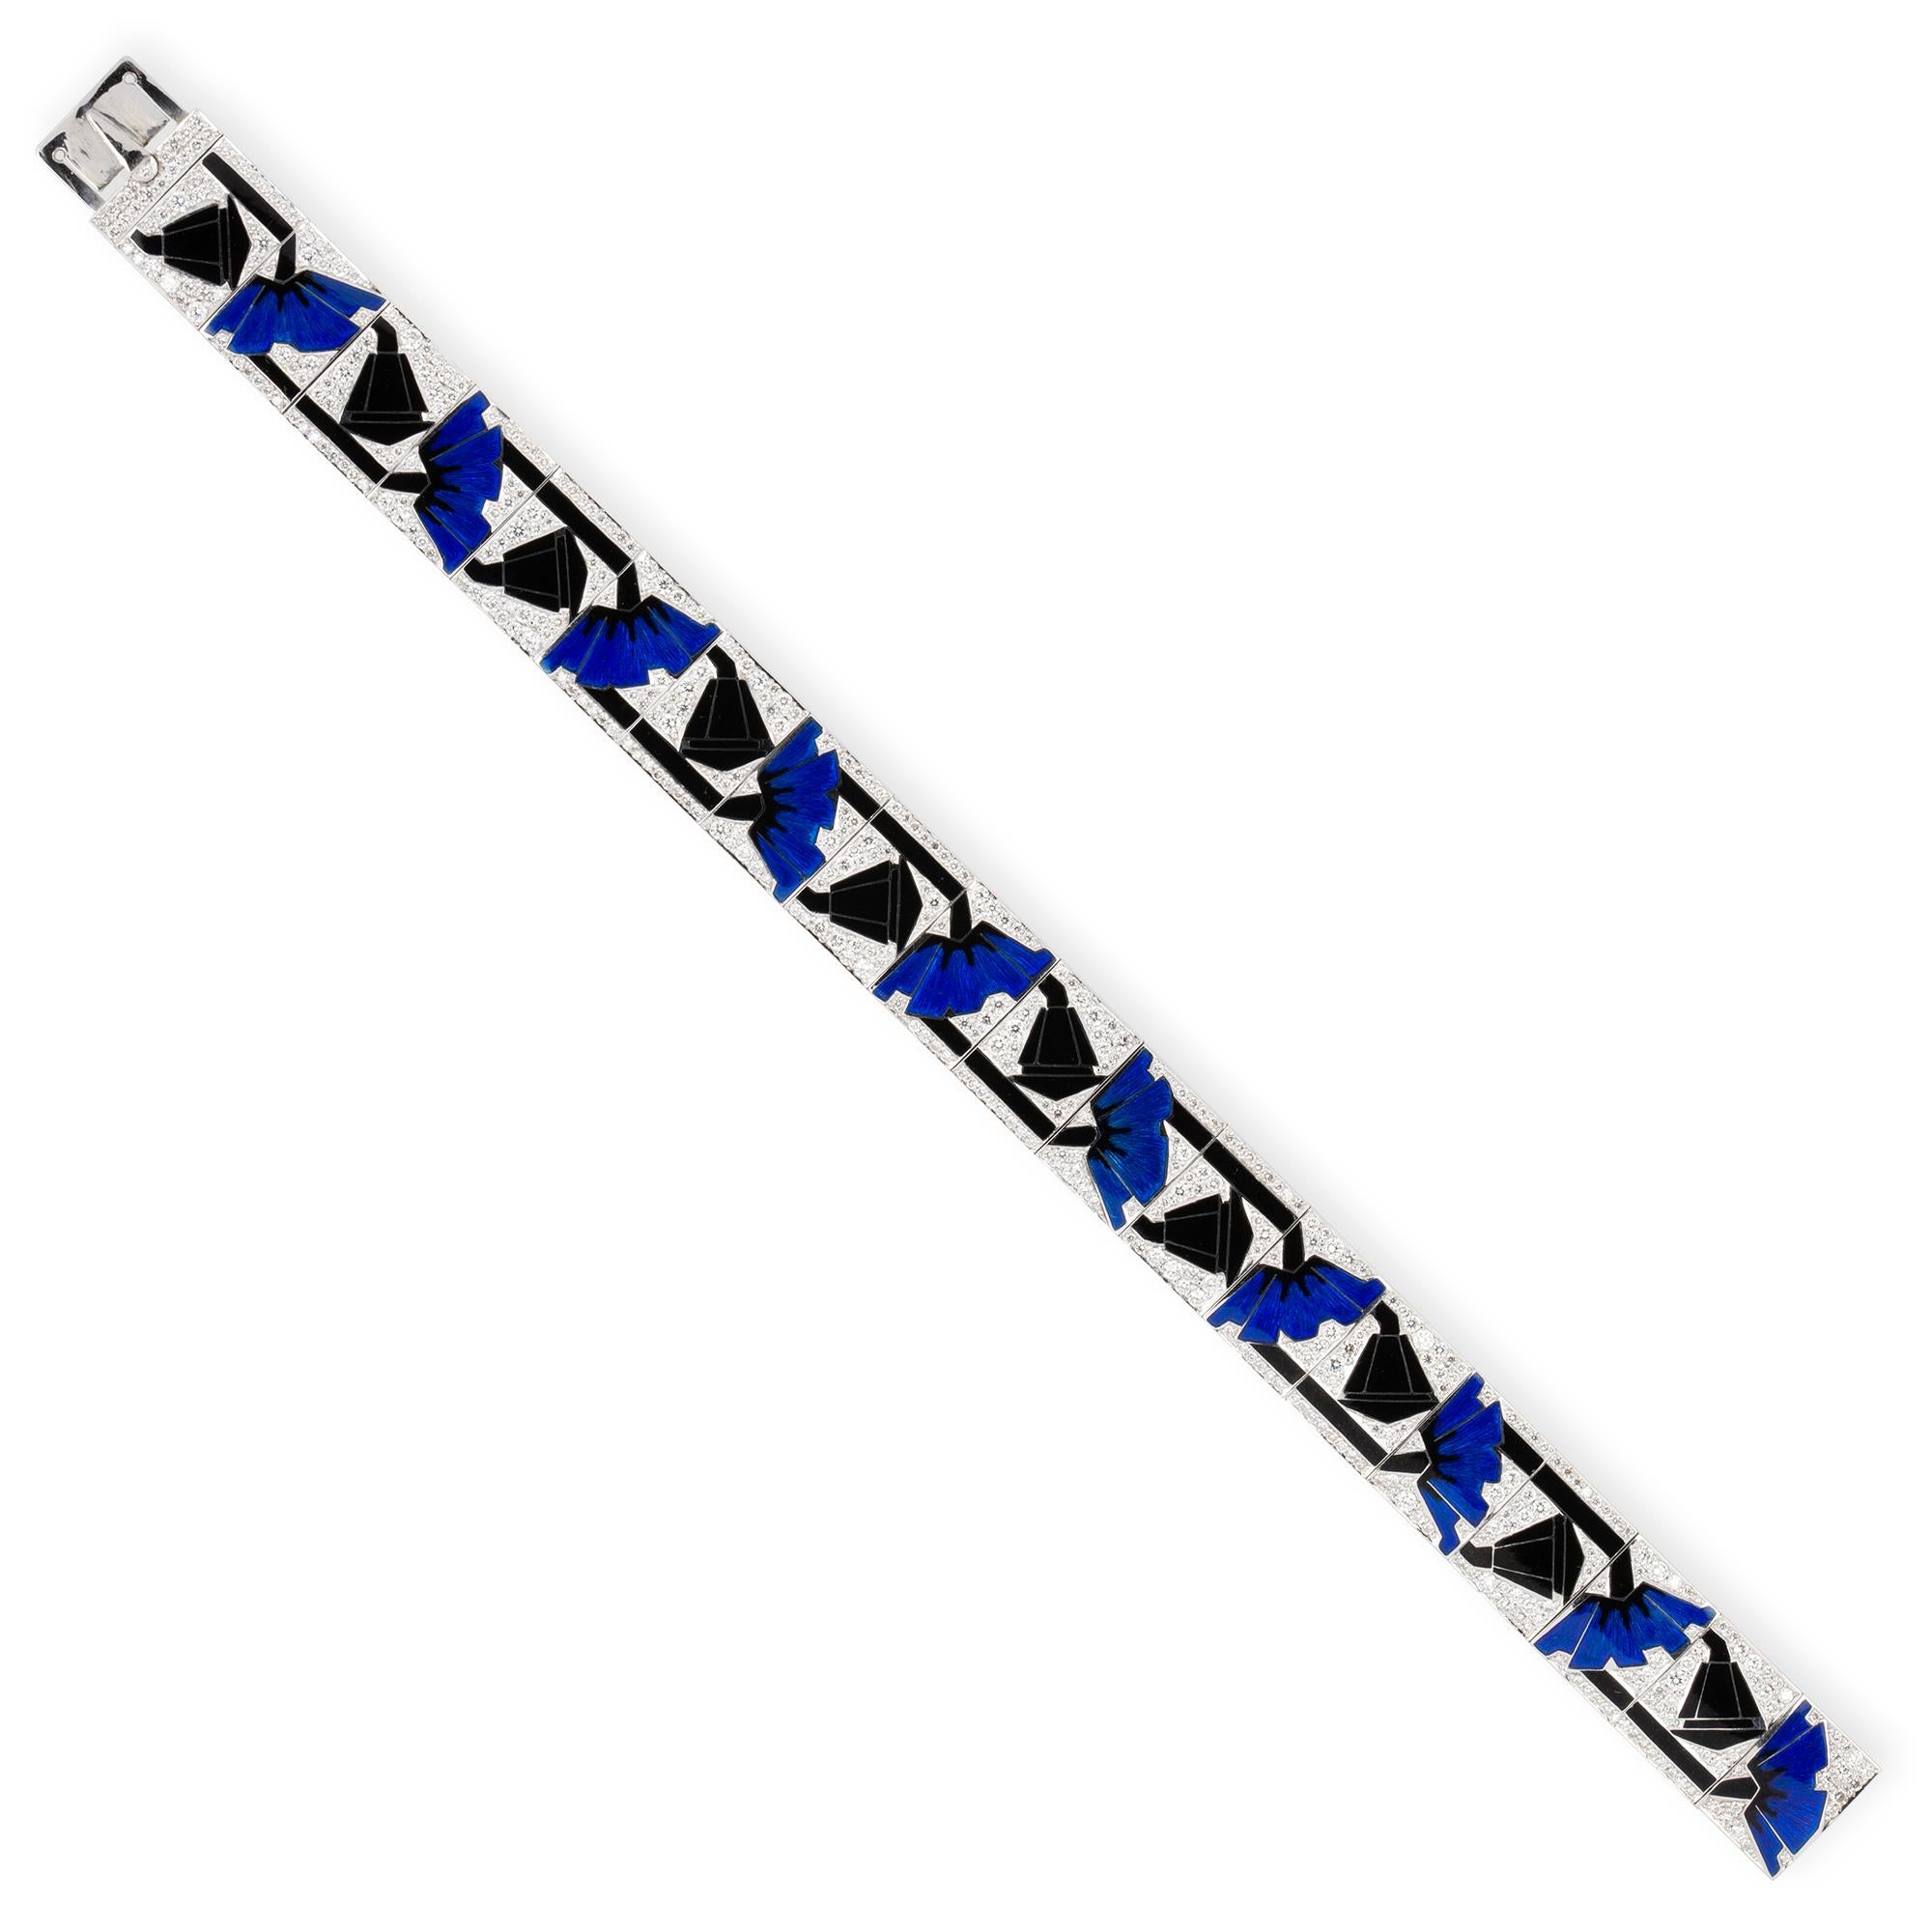 A blue poppies art-deco style bracelet by Ilgiz F, the bracelet consisted of twenty panels depicting blue poppies with champlevé enamelled petals and black enamelled peduncles, on a diamond pave-set background, the diamonds weighing 3.88 carats in